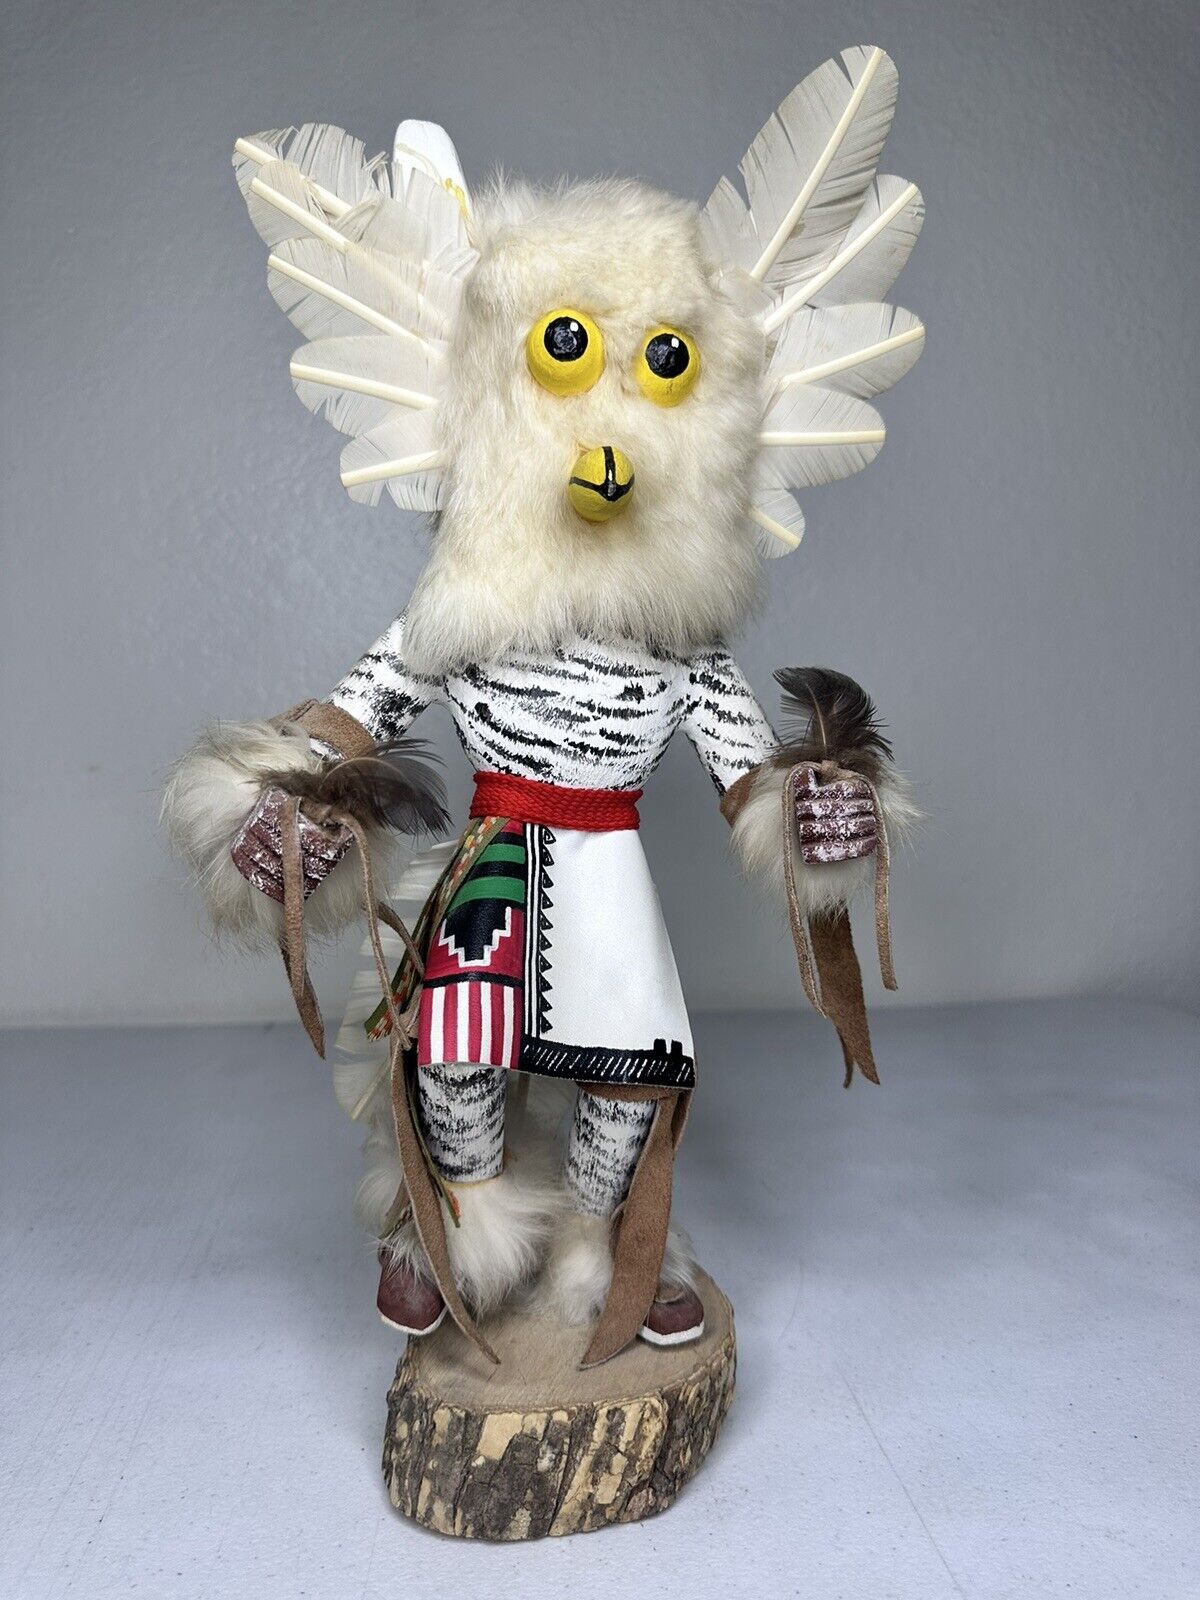 Handcrafted 15” Snowy Owl Kachina Doll by Bakabi - Native American Art Collect